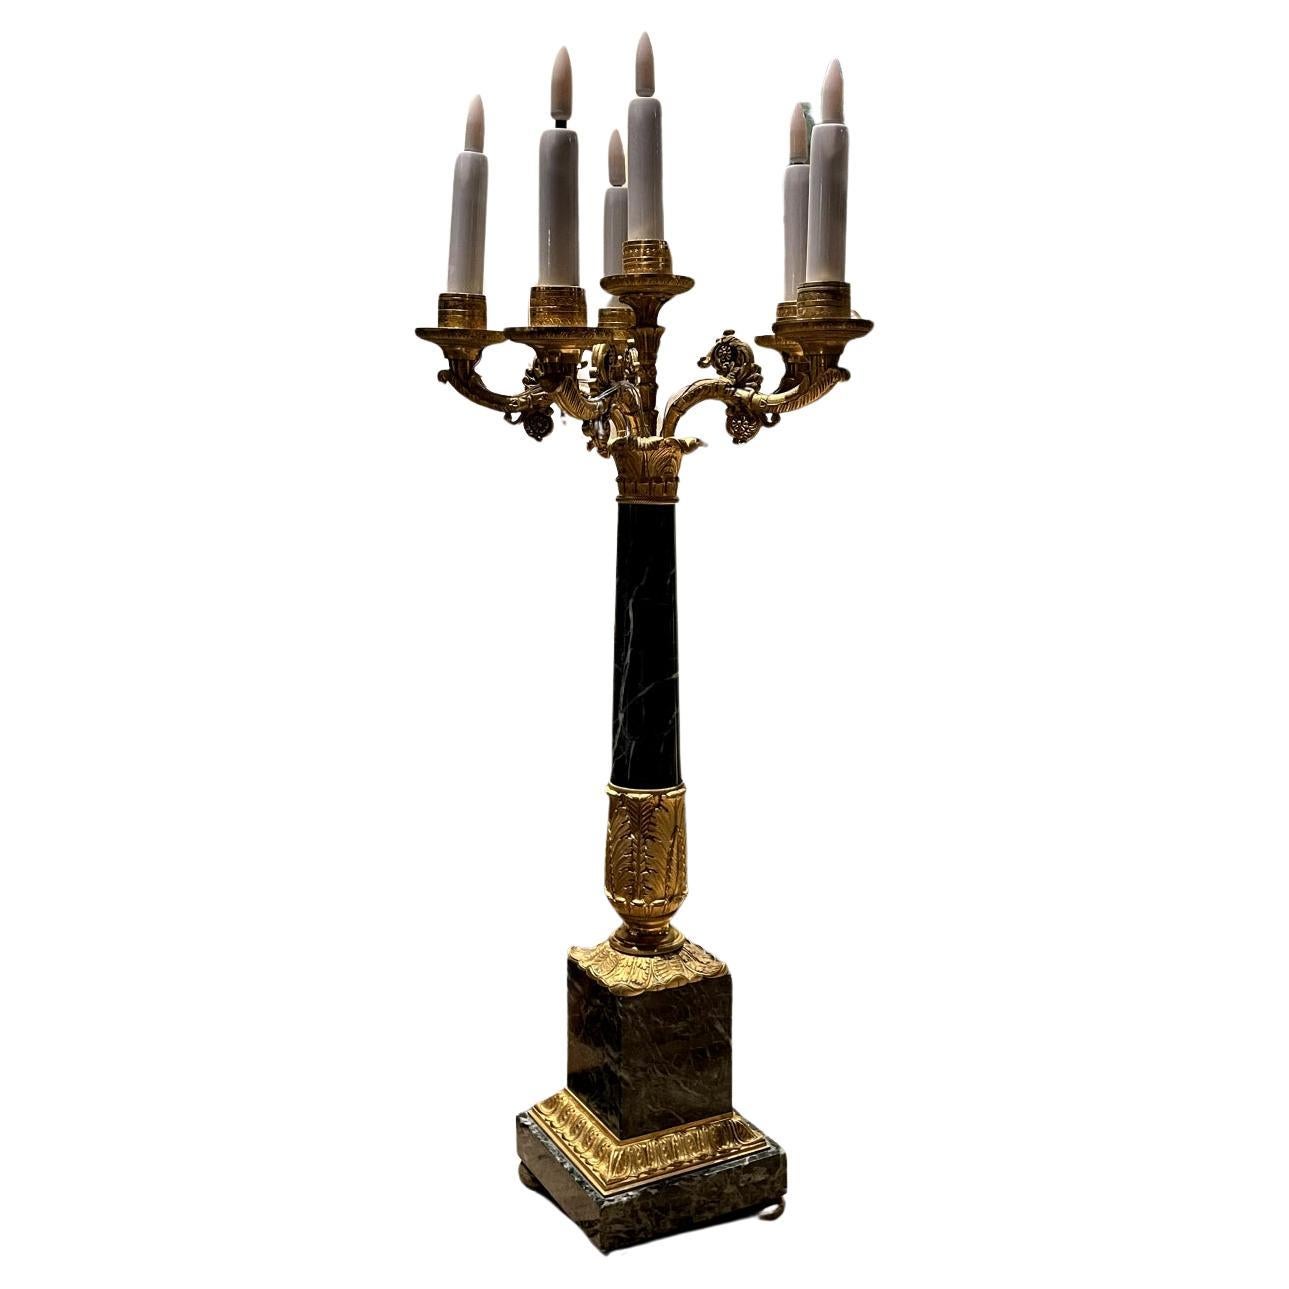 20th Century French Fire-Gilded Bronze and Green Marble Candelabra